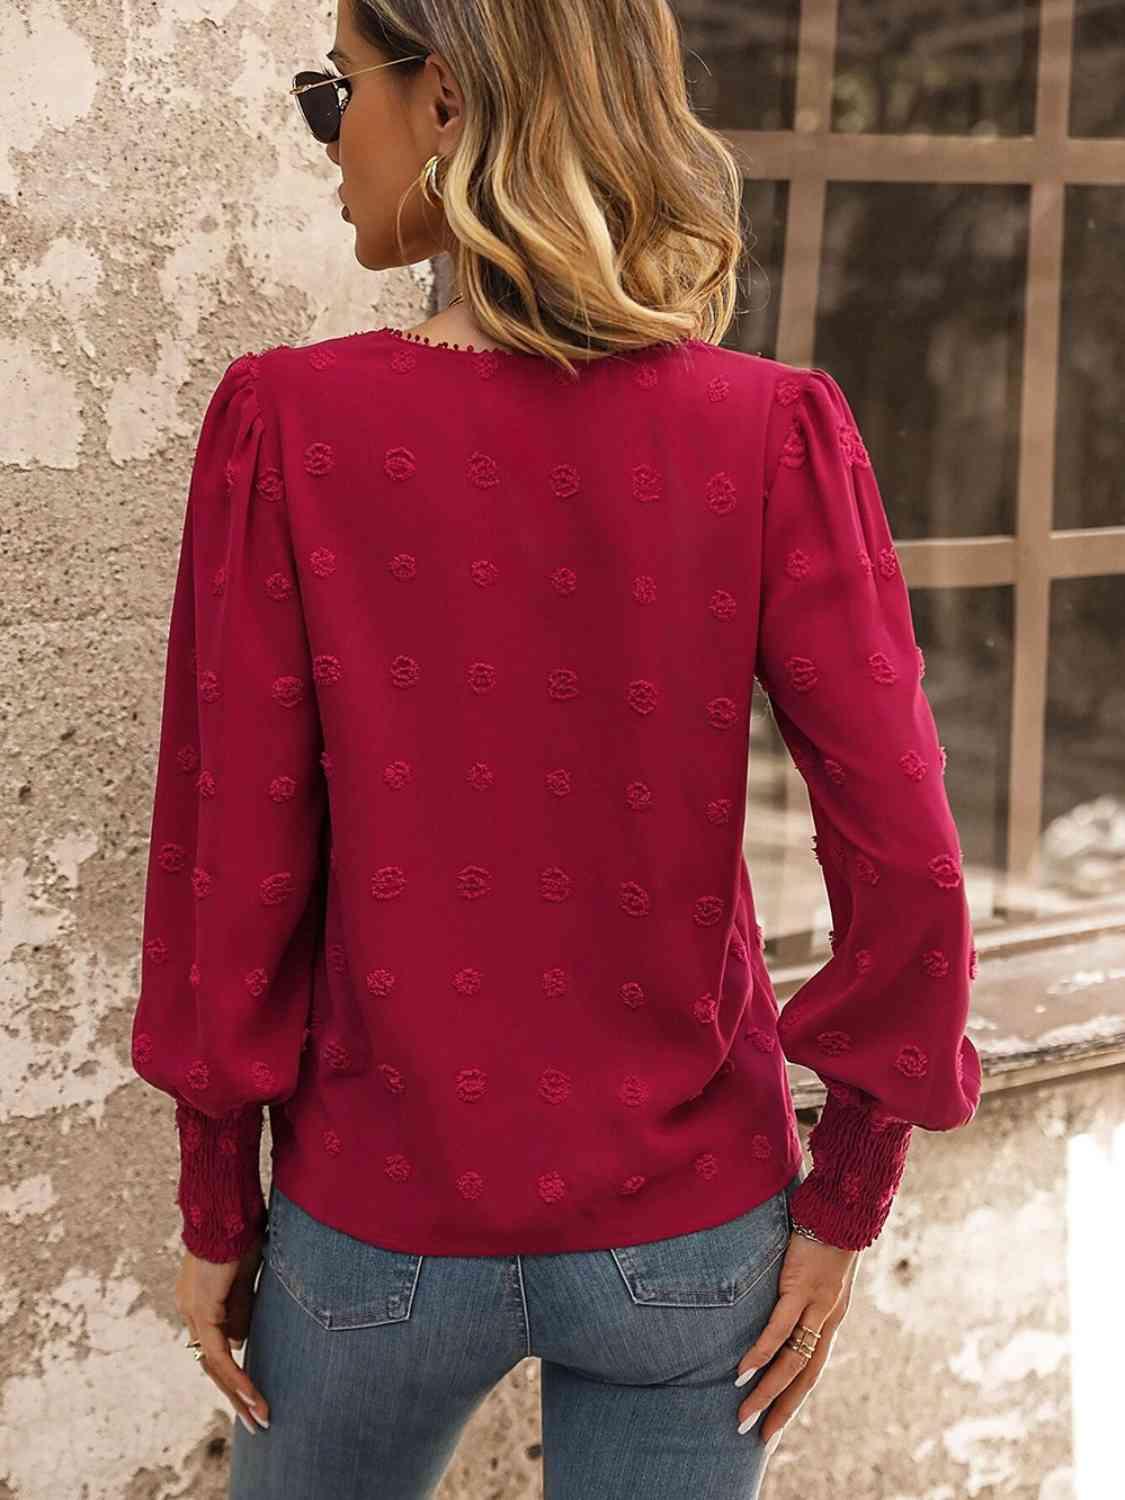 a woman wearing a red blouse and jeans